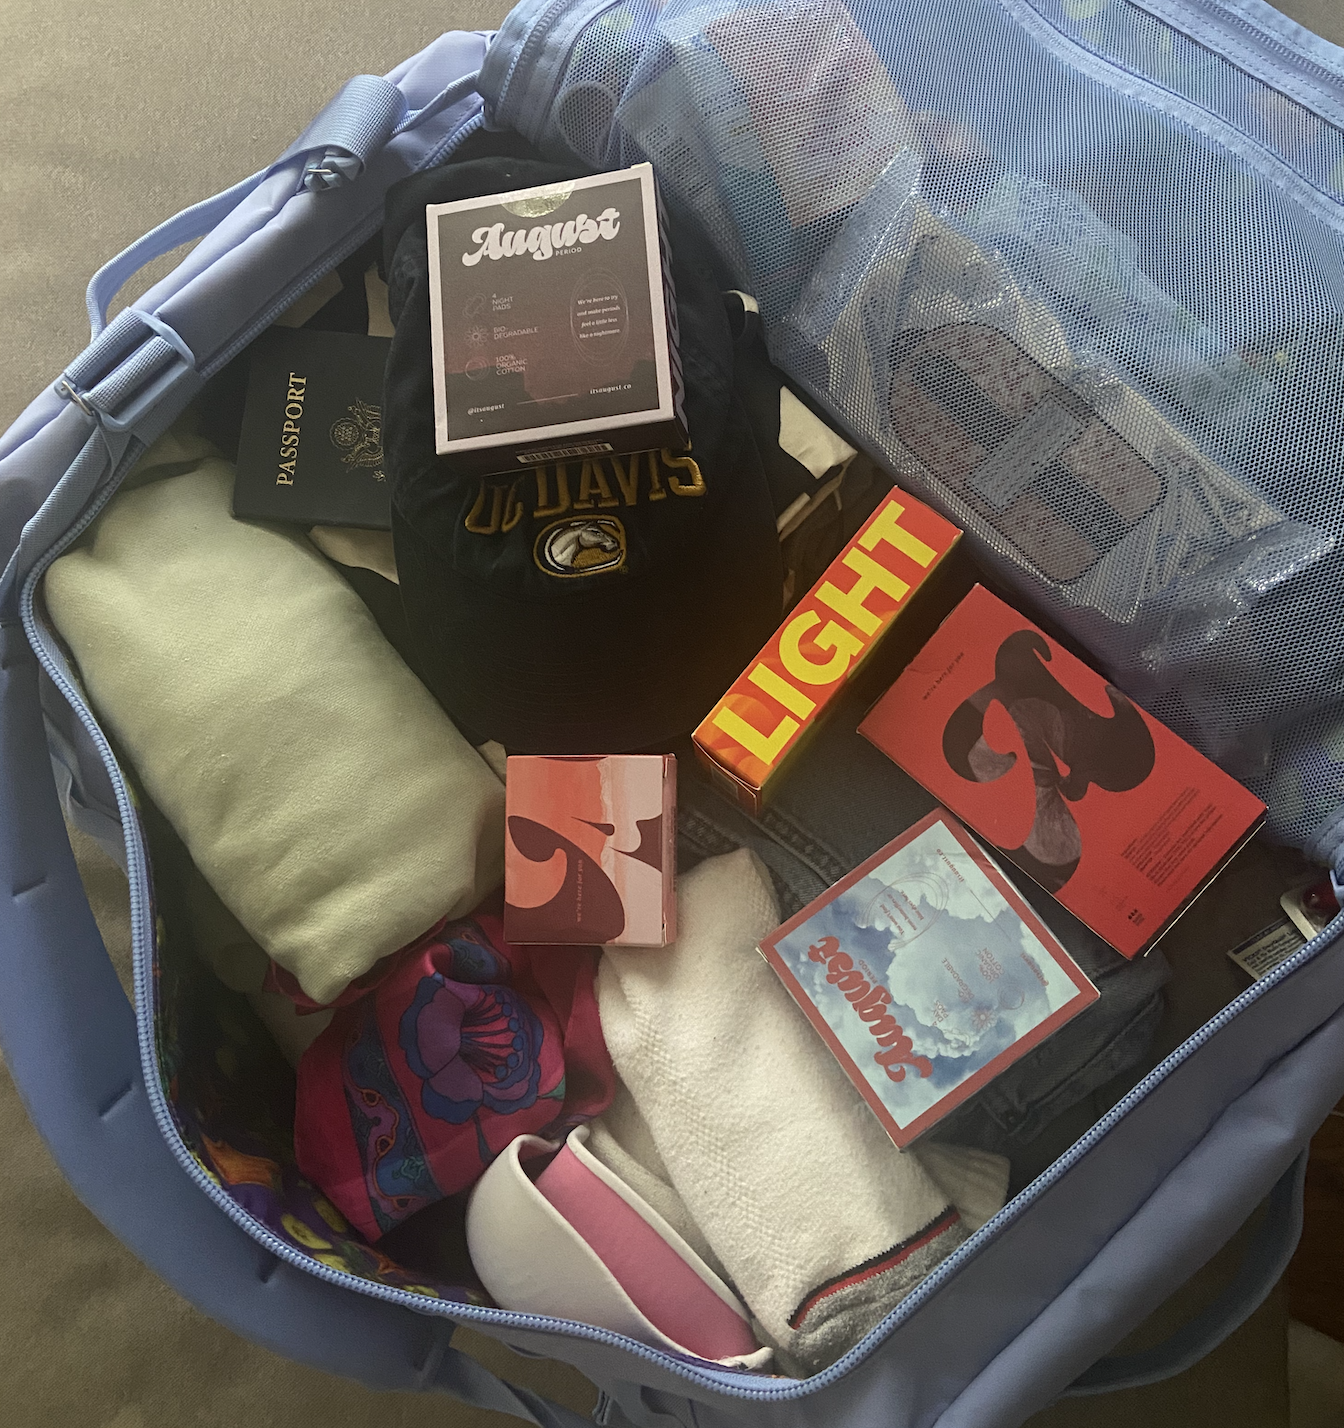 An open suitcase filled with august period product boxes and clothes